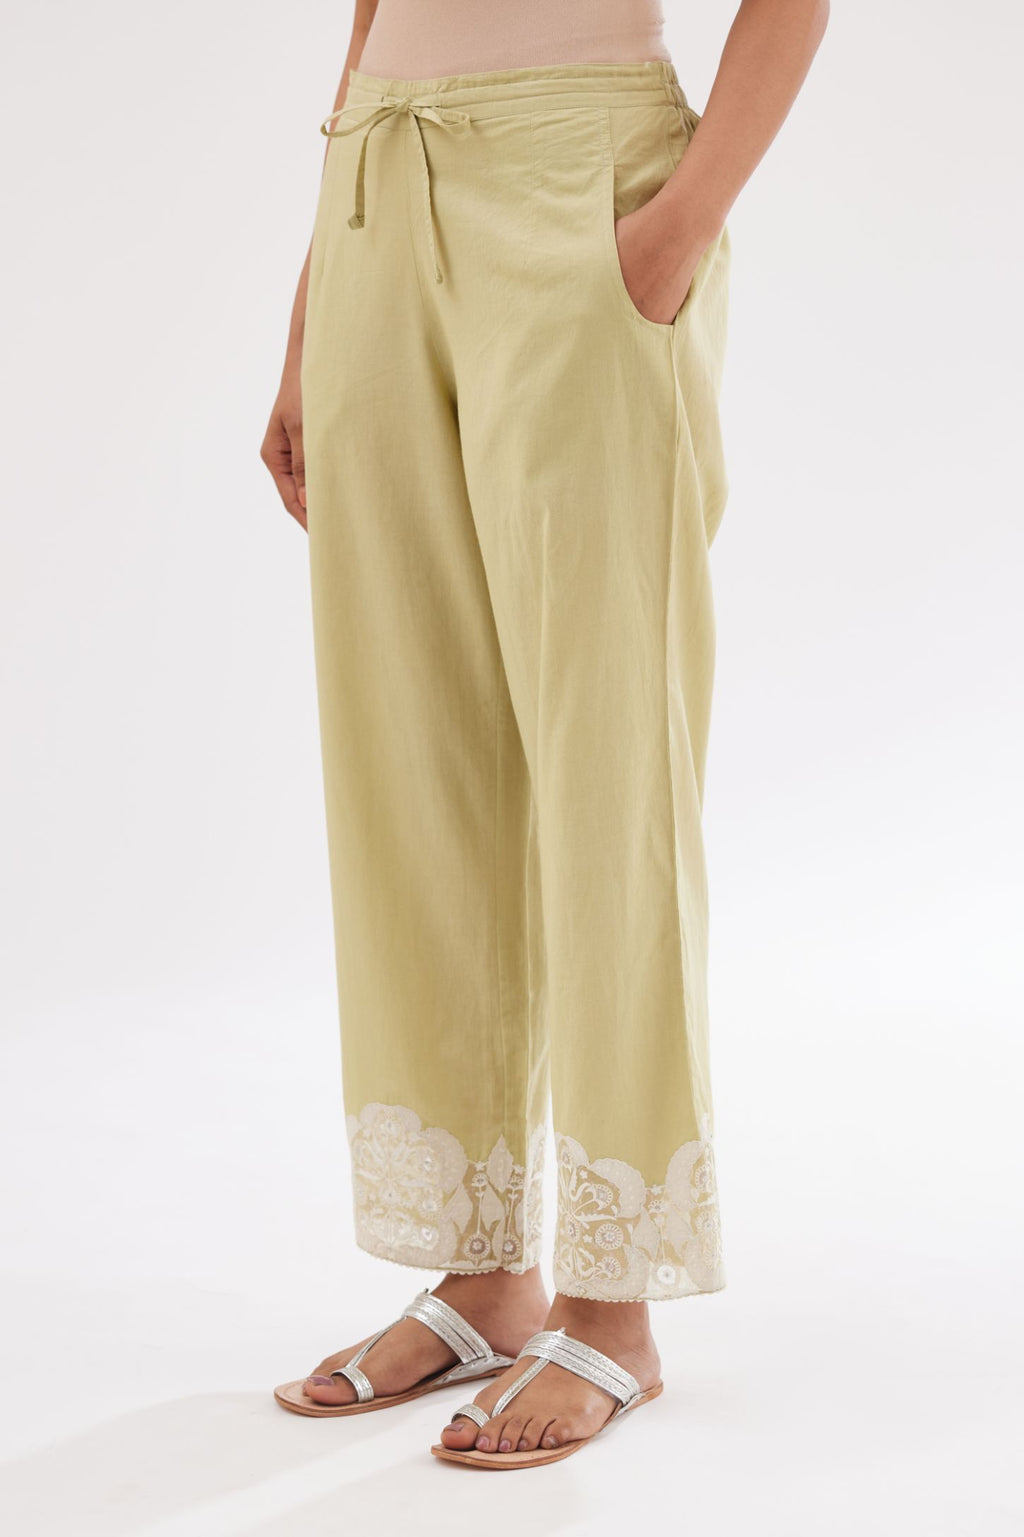 Green cotton straight pants with appliqué and hand attached sequins detailing at bottom hem.